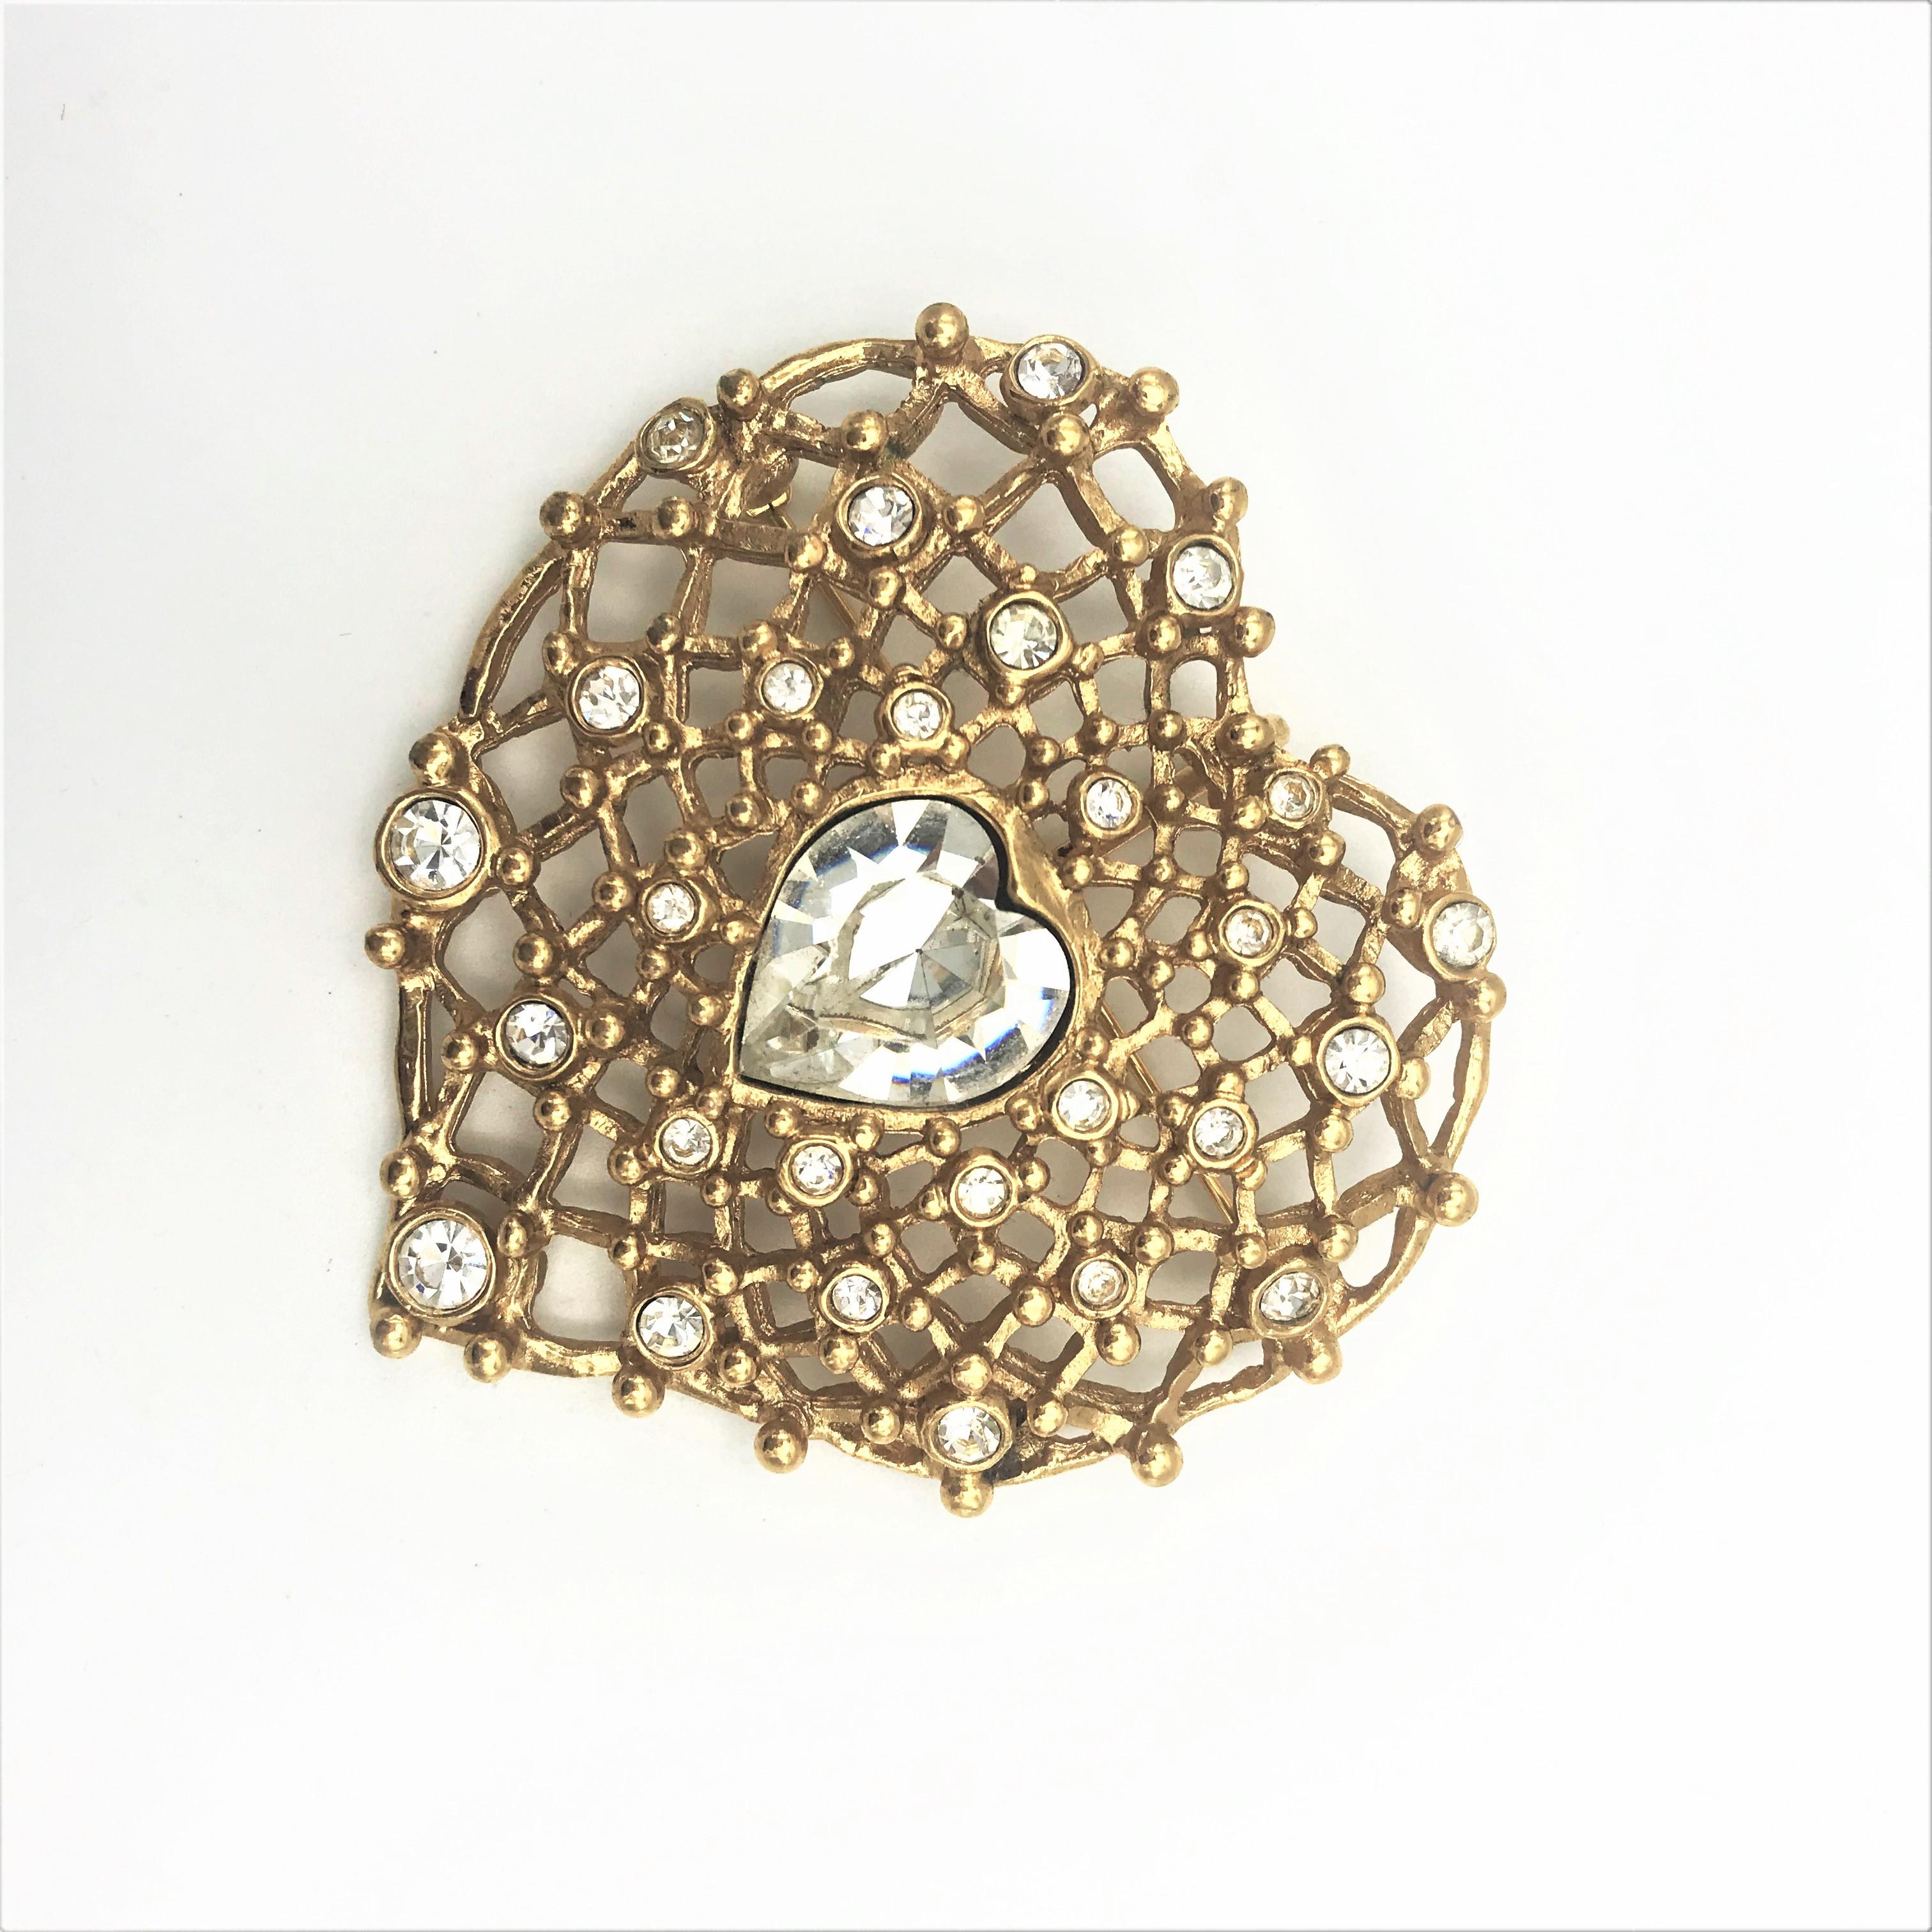 Artisan Yves St. Laurent Paris heart brooch with rhinestones gold plated 1980/90s